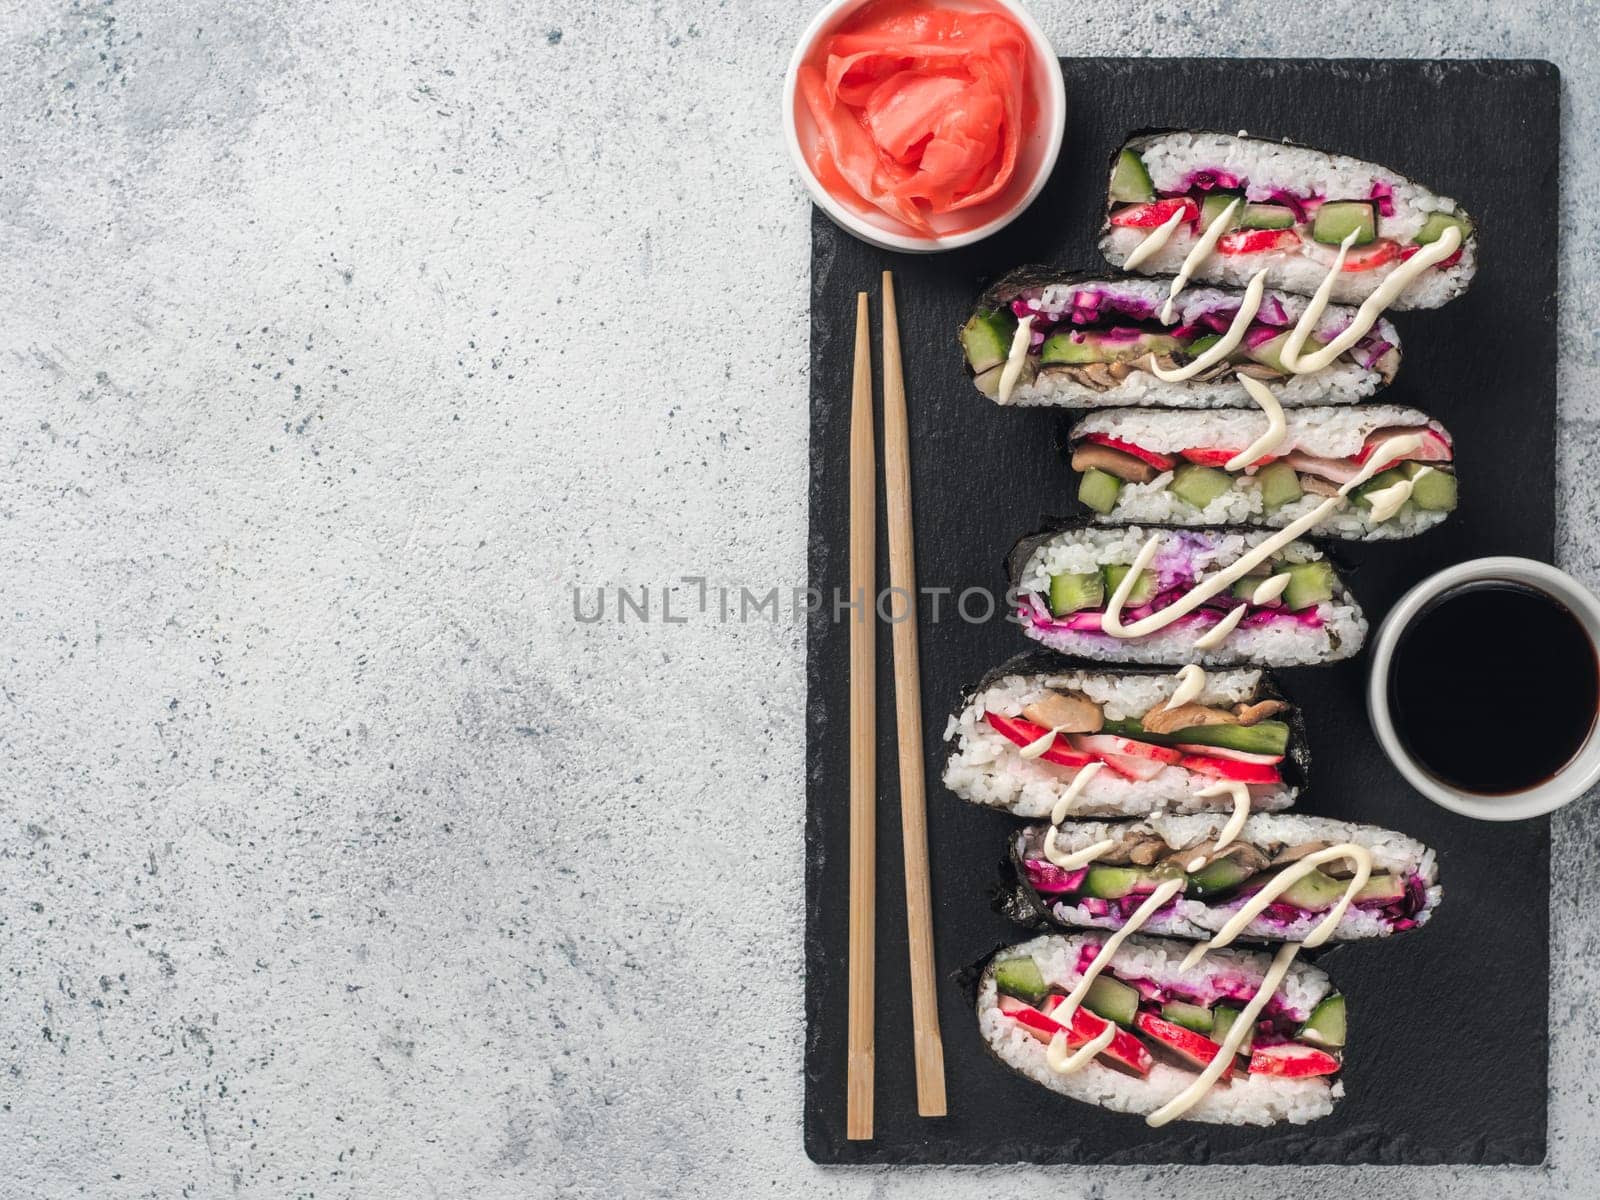 Vegan sushi sandwich onigirazu with mushrooms and vegetables.Healthy dinner recipe and idea. Colorful japan sandwich onigirazu with red cabbage,radish,cucumber,mushrooms.Trend food.Copy space.Top view